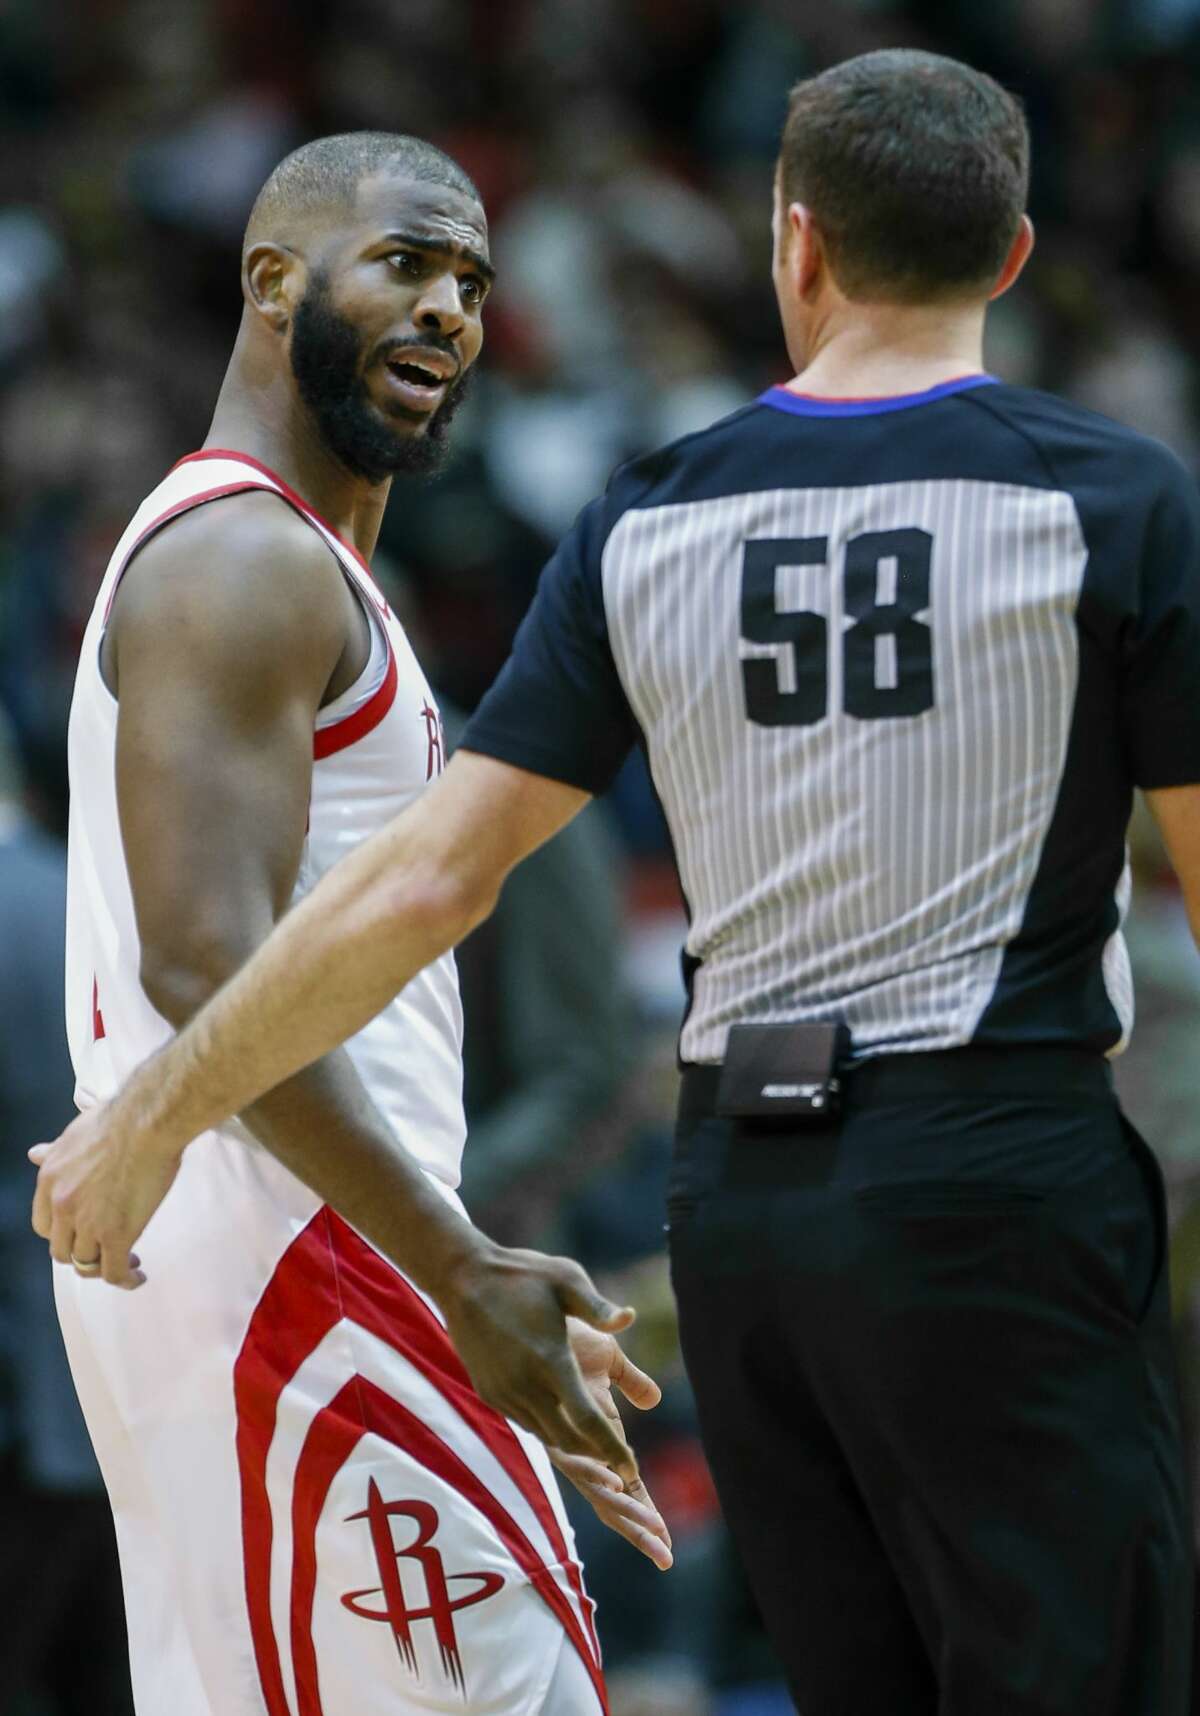 Houston Rockets guard Chris Paul (3) talks to referee Josh Tiven (58) during a time out in the second half of an NBA basketball game against the Orlando Magic at Toyota Center on Sunday, Jan. 27, 2019, in Houston.